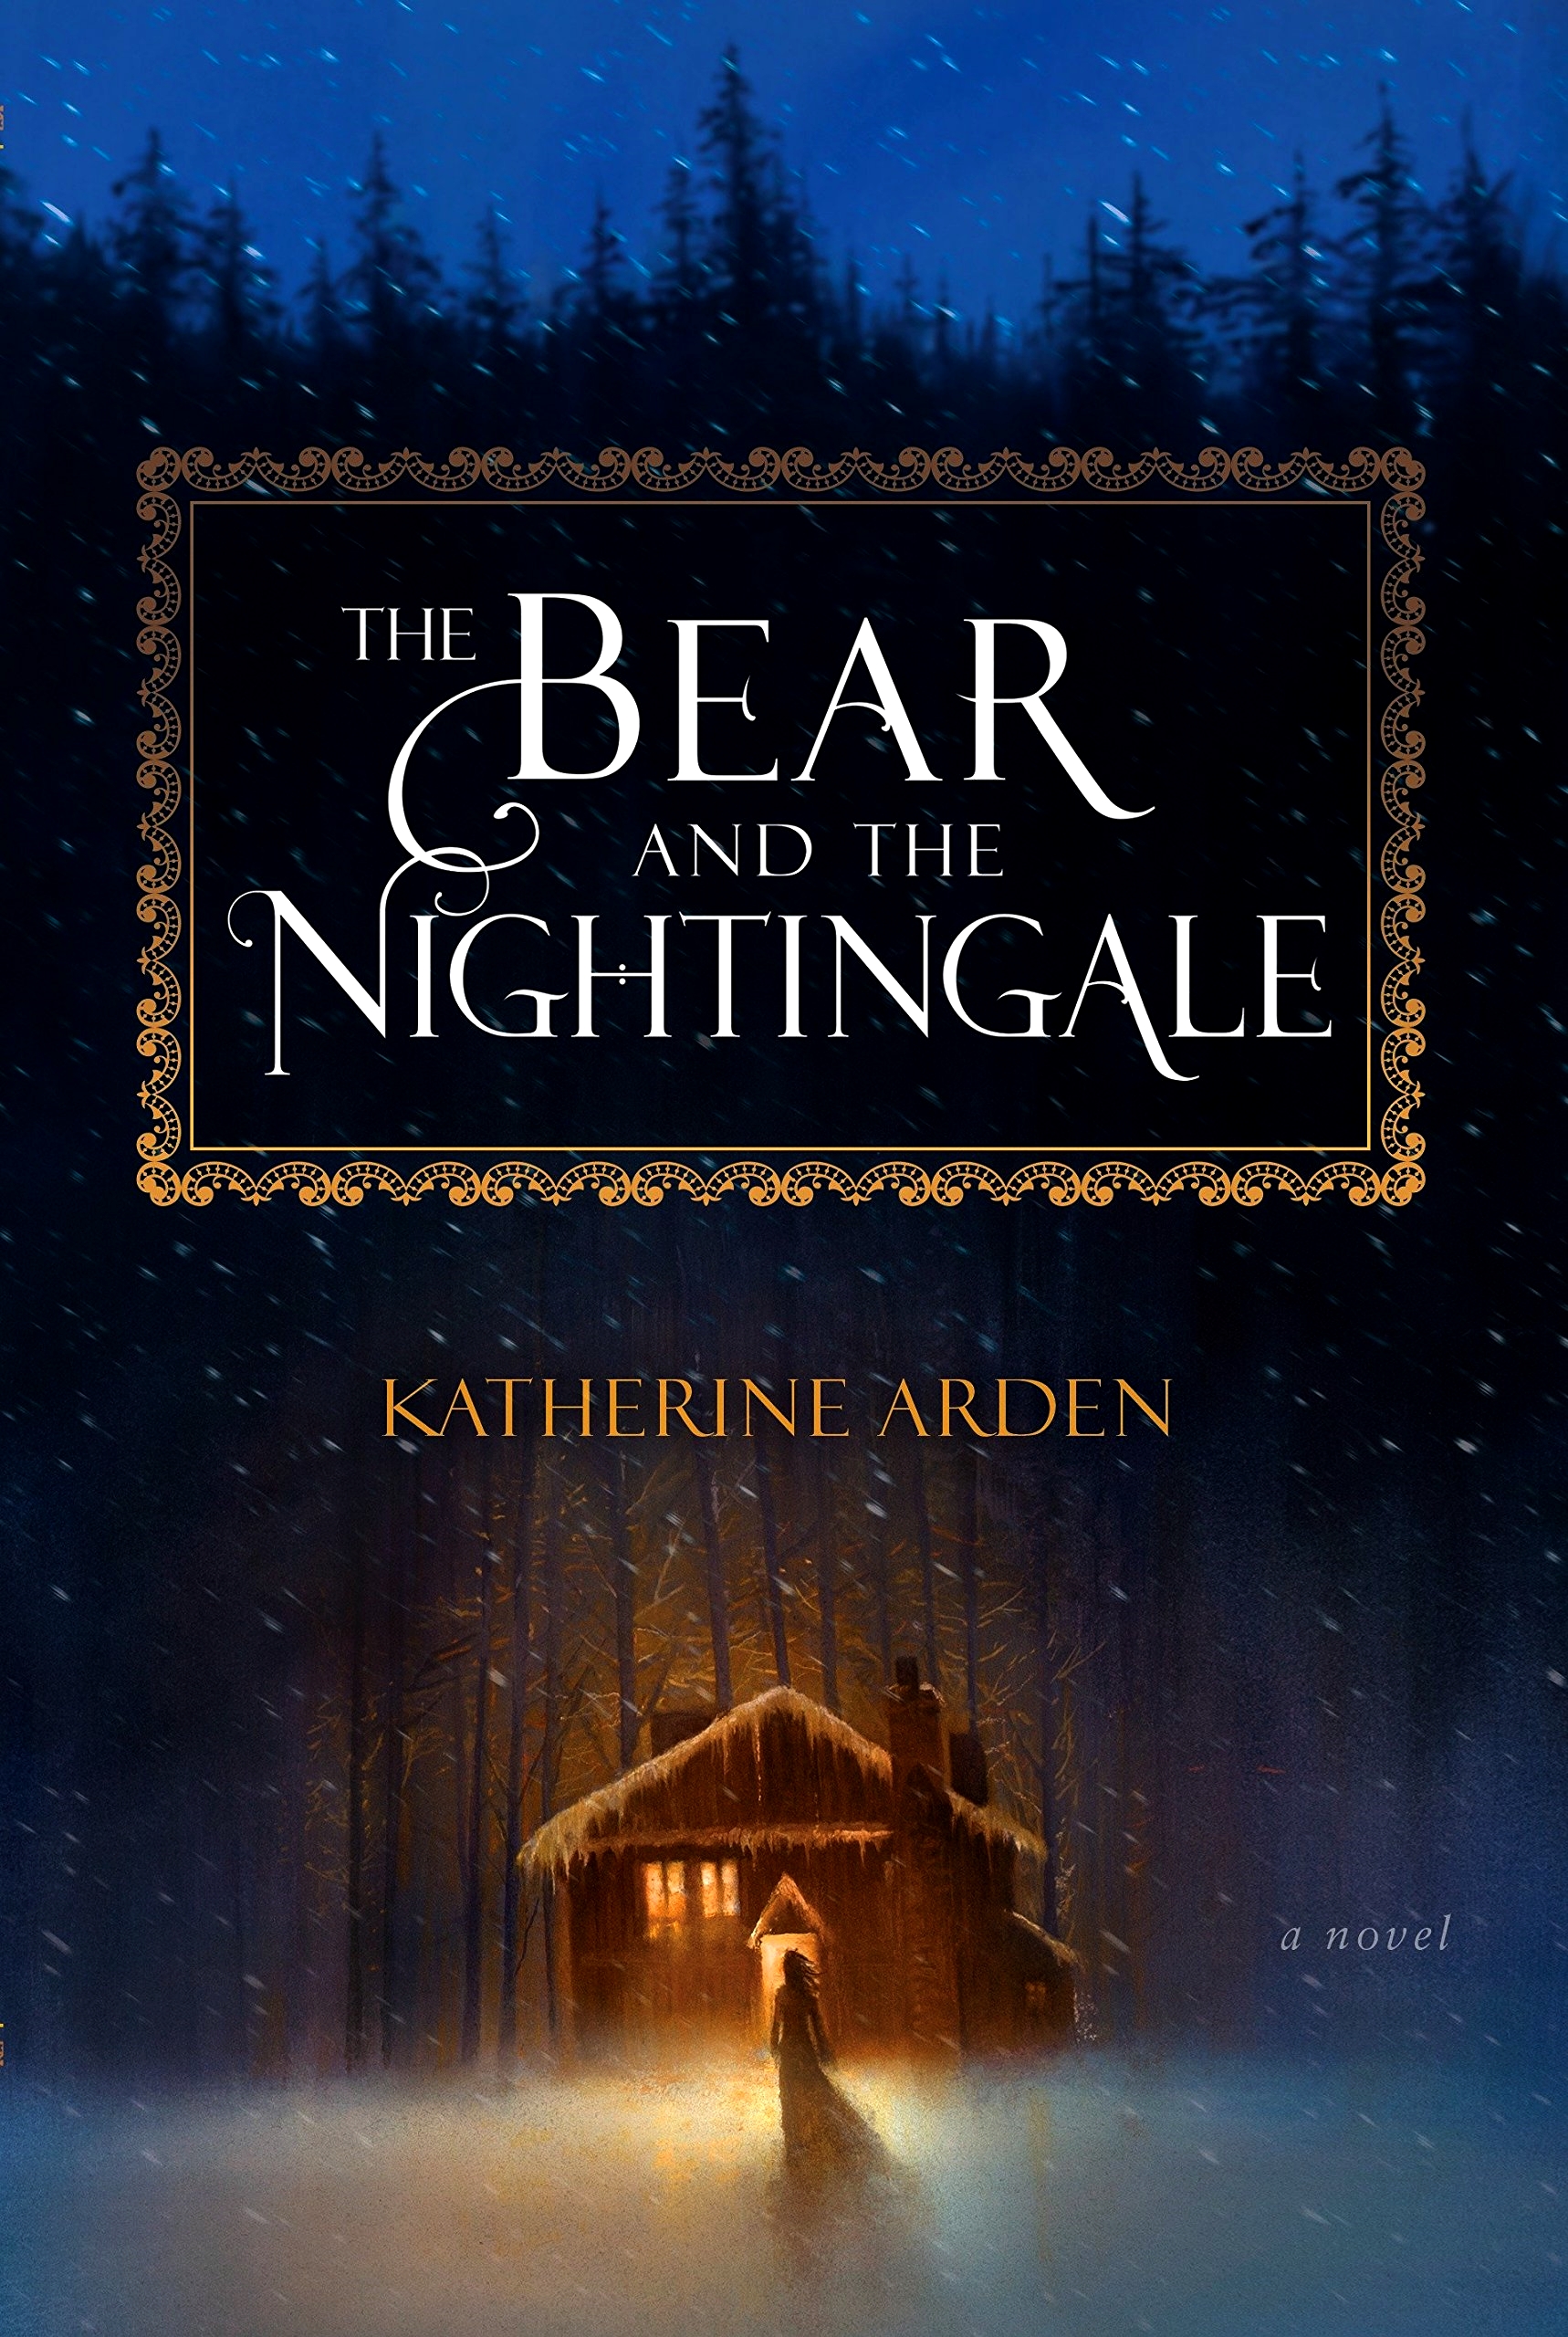 [EPUB] The Winternight Trilogy #1 The Bear and the Nightingale by Katherine Arden